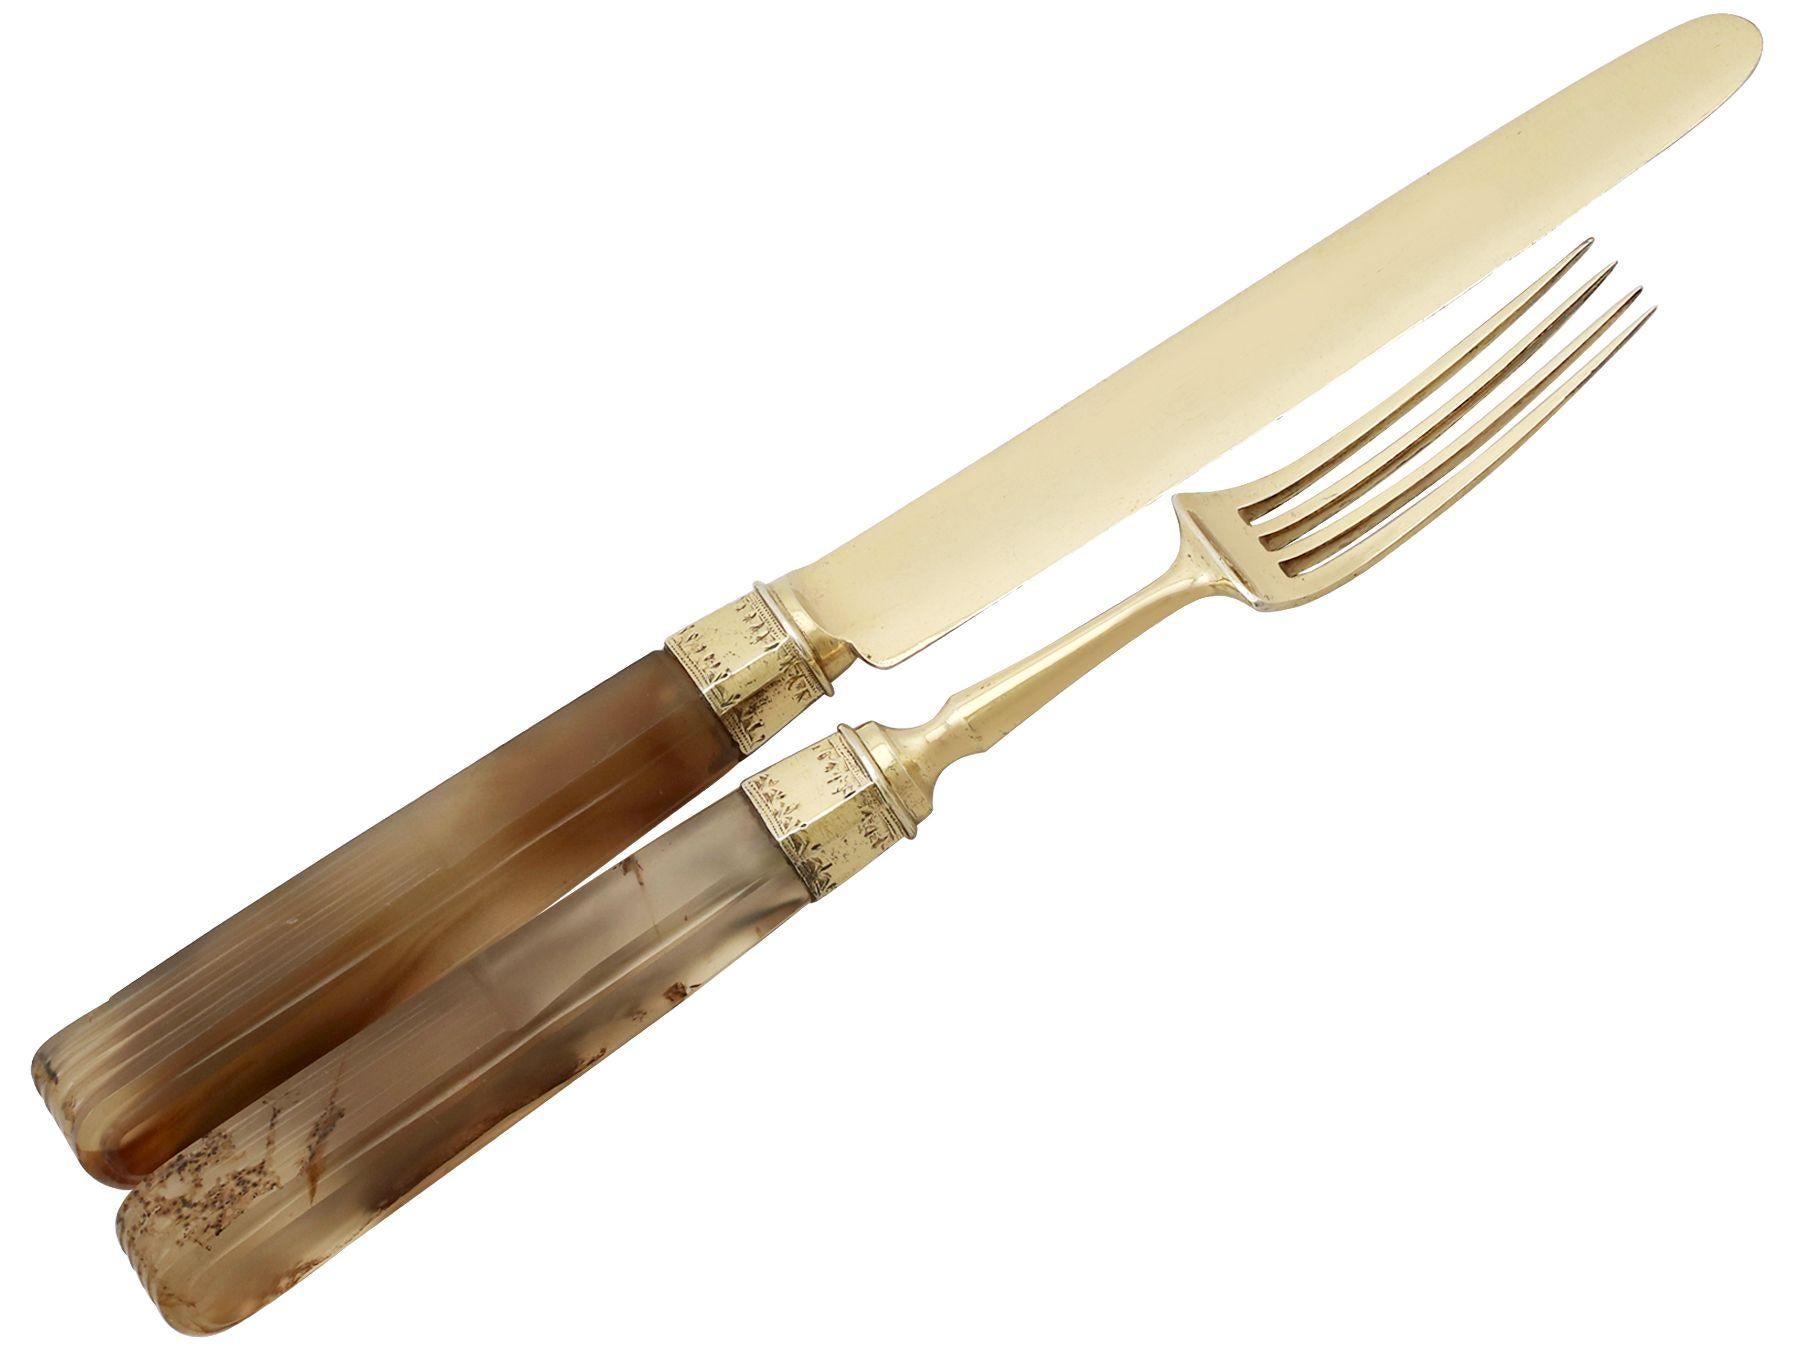 An exceptional, fine and impressive pair of antique Indian silver gilt and agate handled travelling knife and fork set, boxed; an addition to our silver flatware collection

This exceptional antique Indian silver gilt and agate handle knife and